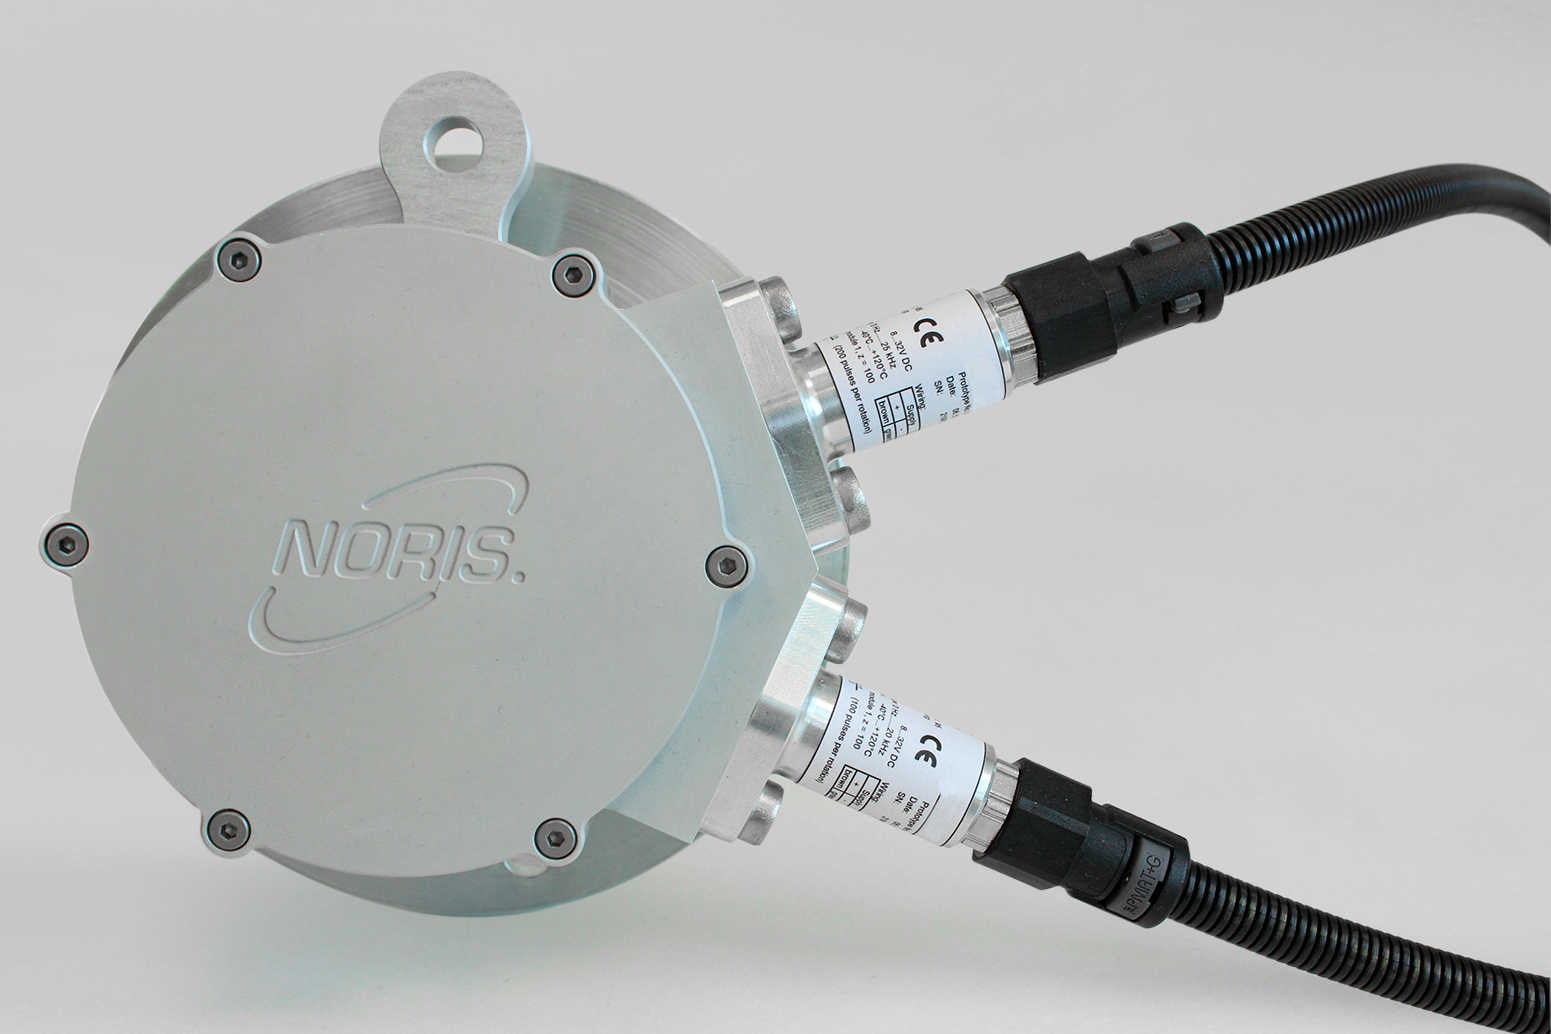 The images shows an axle pulse generator type NA56with two integrated speed sensors on a grey background.